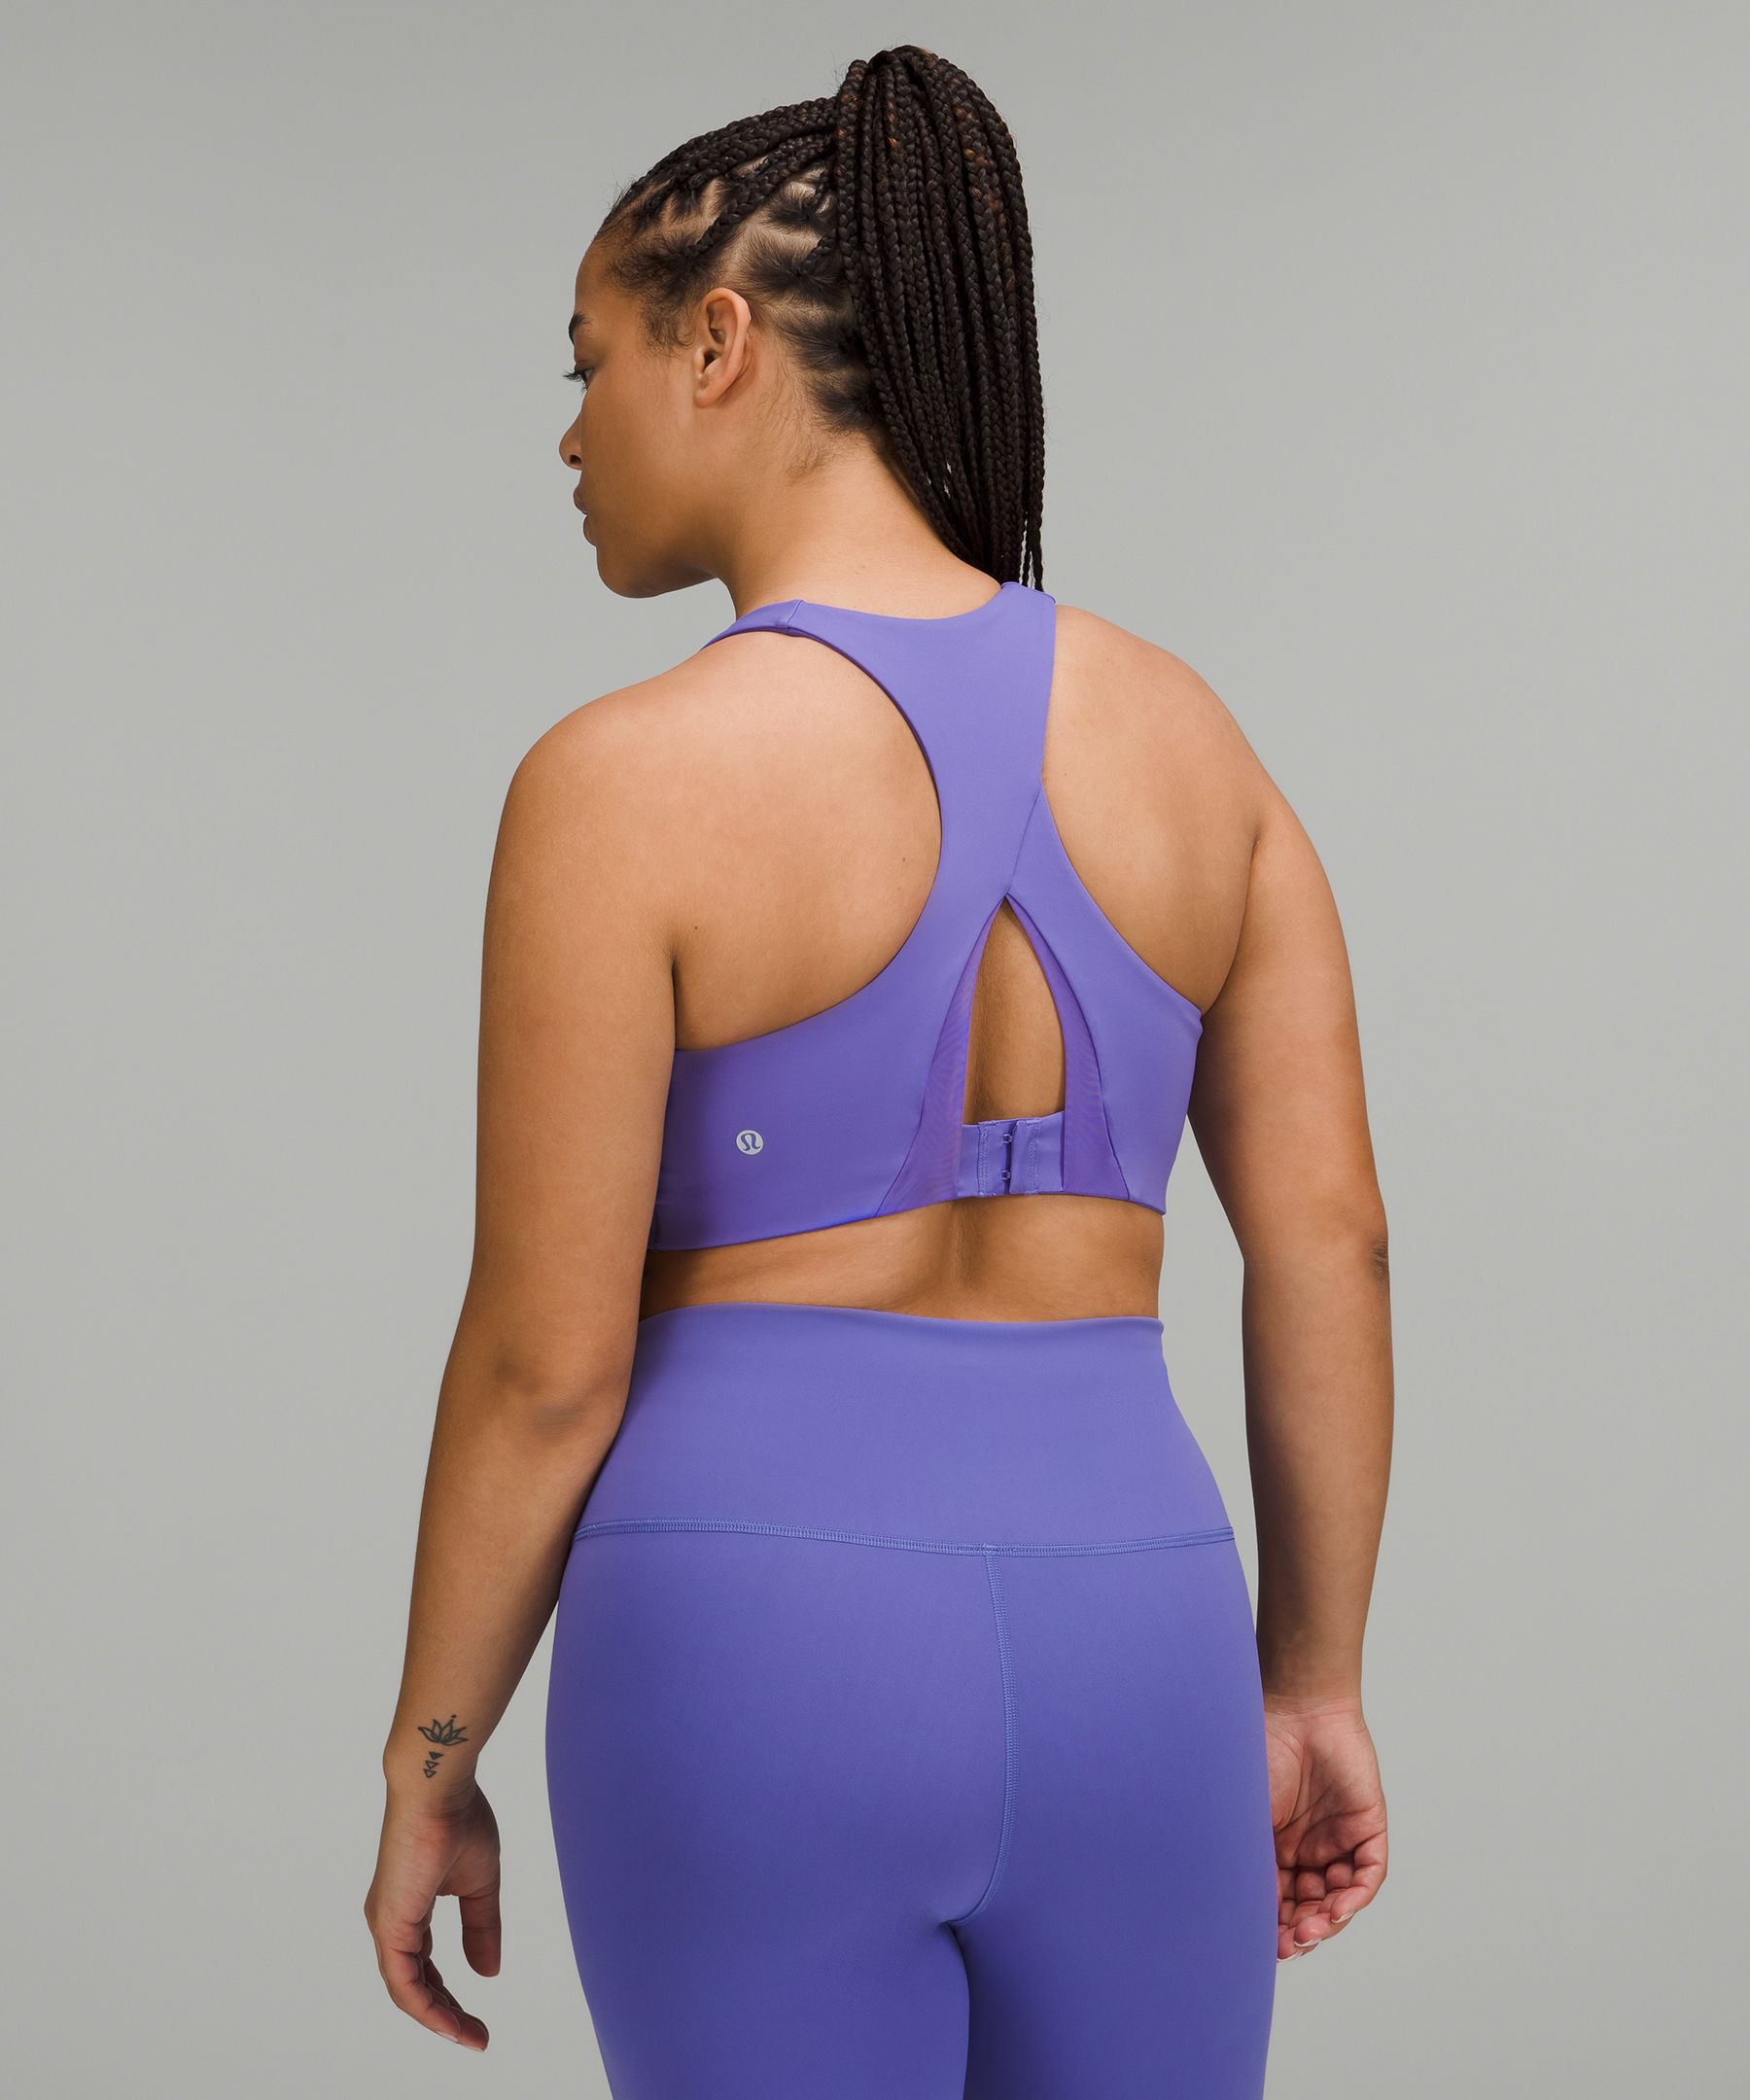 Lululemon - Invigorate Bra with Clasp *High Support, B/C Cup Online Only